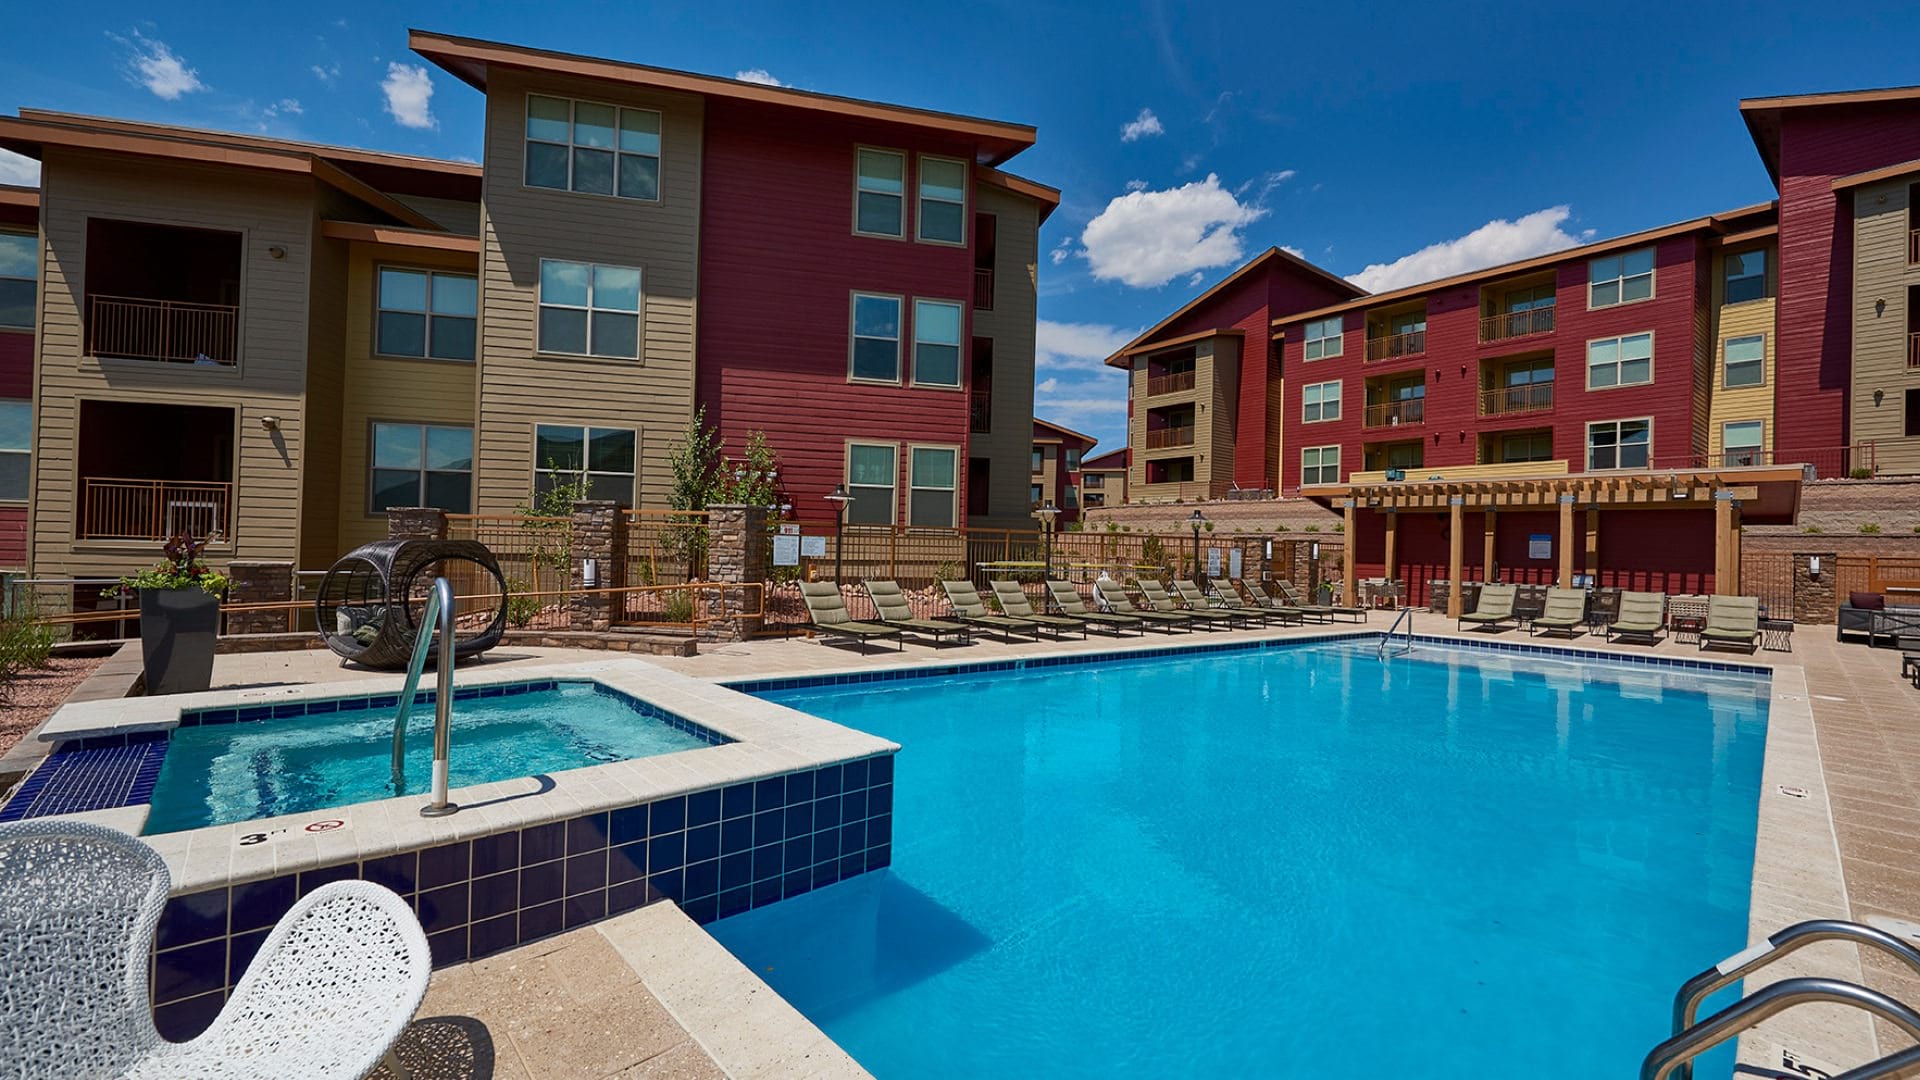 Resort-style pool and heated spa at our apartments in North Colorado Springs